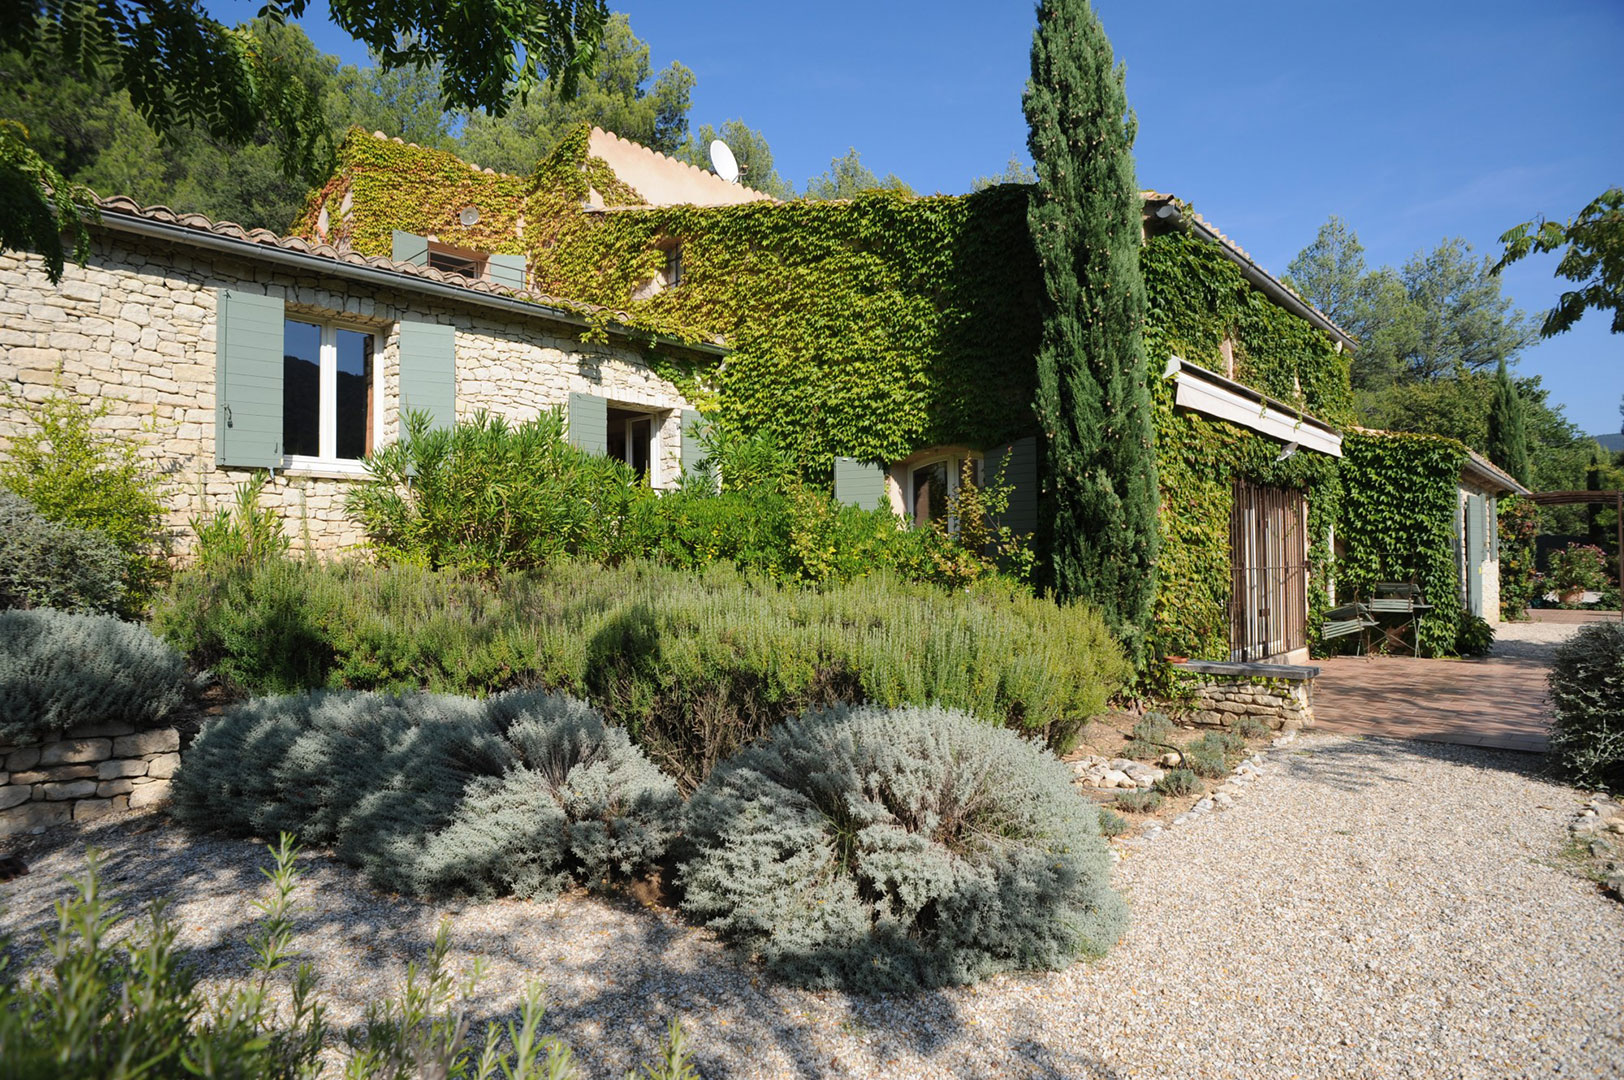 For sale in the Luberon, recently renovated house with splendid view